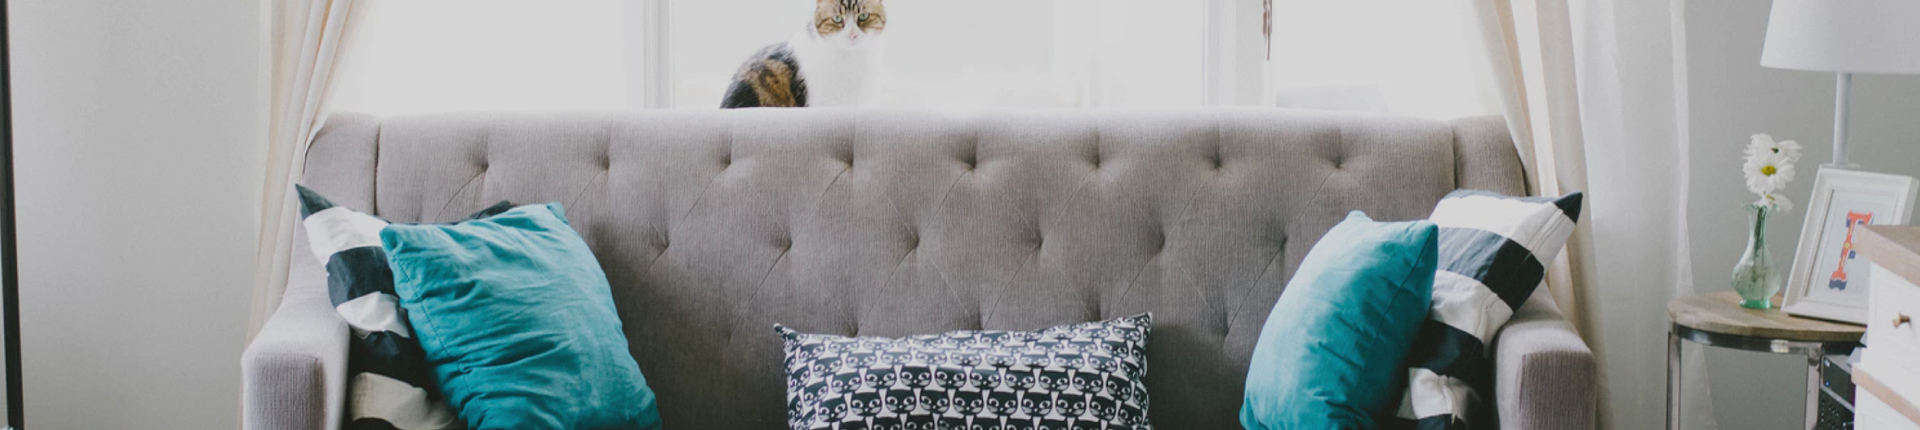 Fix and Flip Loans California - grey couch with teal cushions